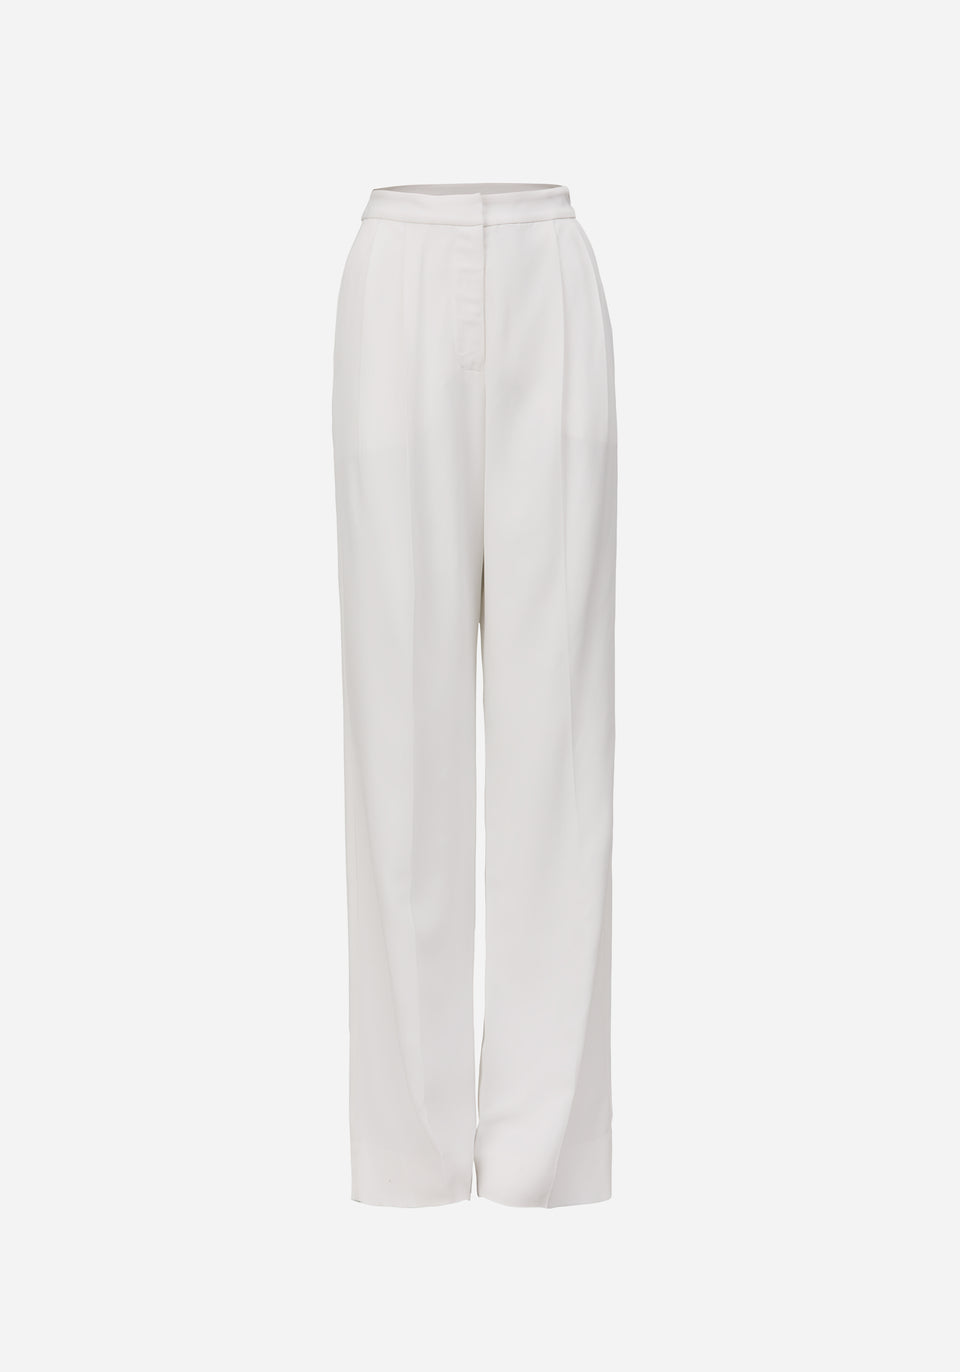 Rolodoex Trouser - Ivory